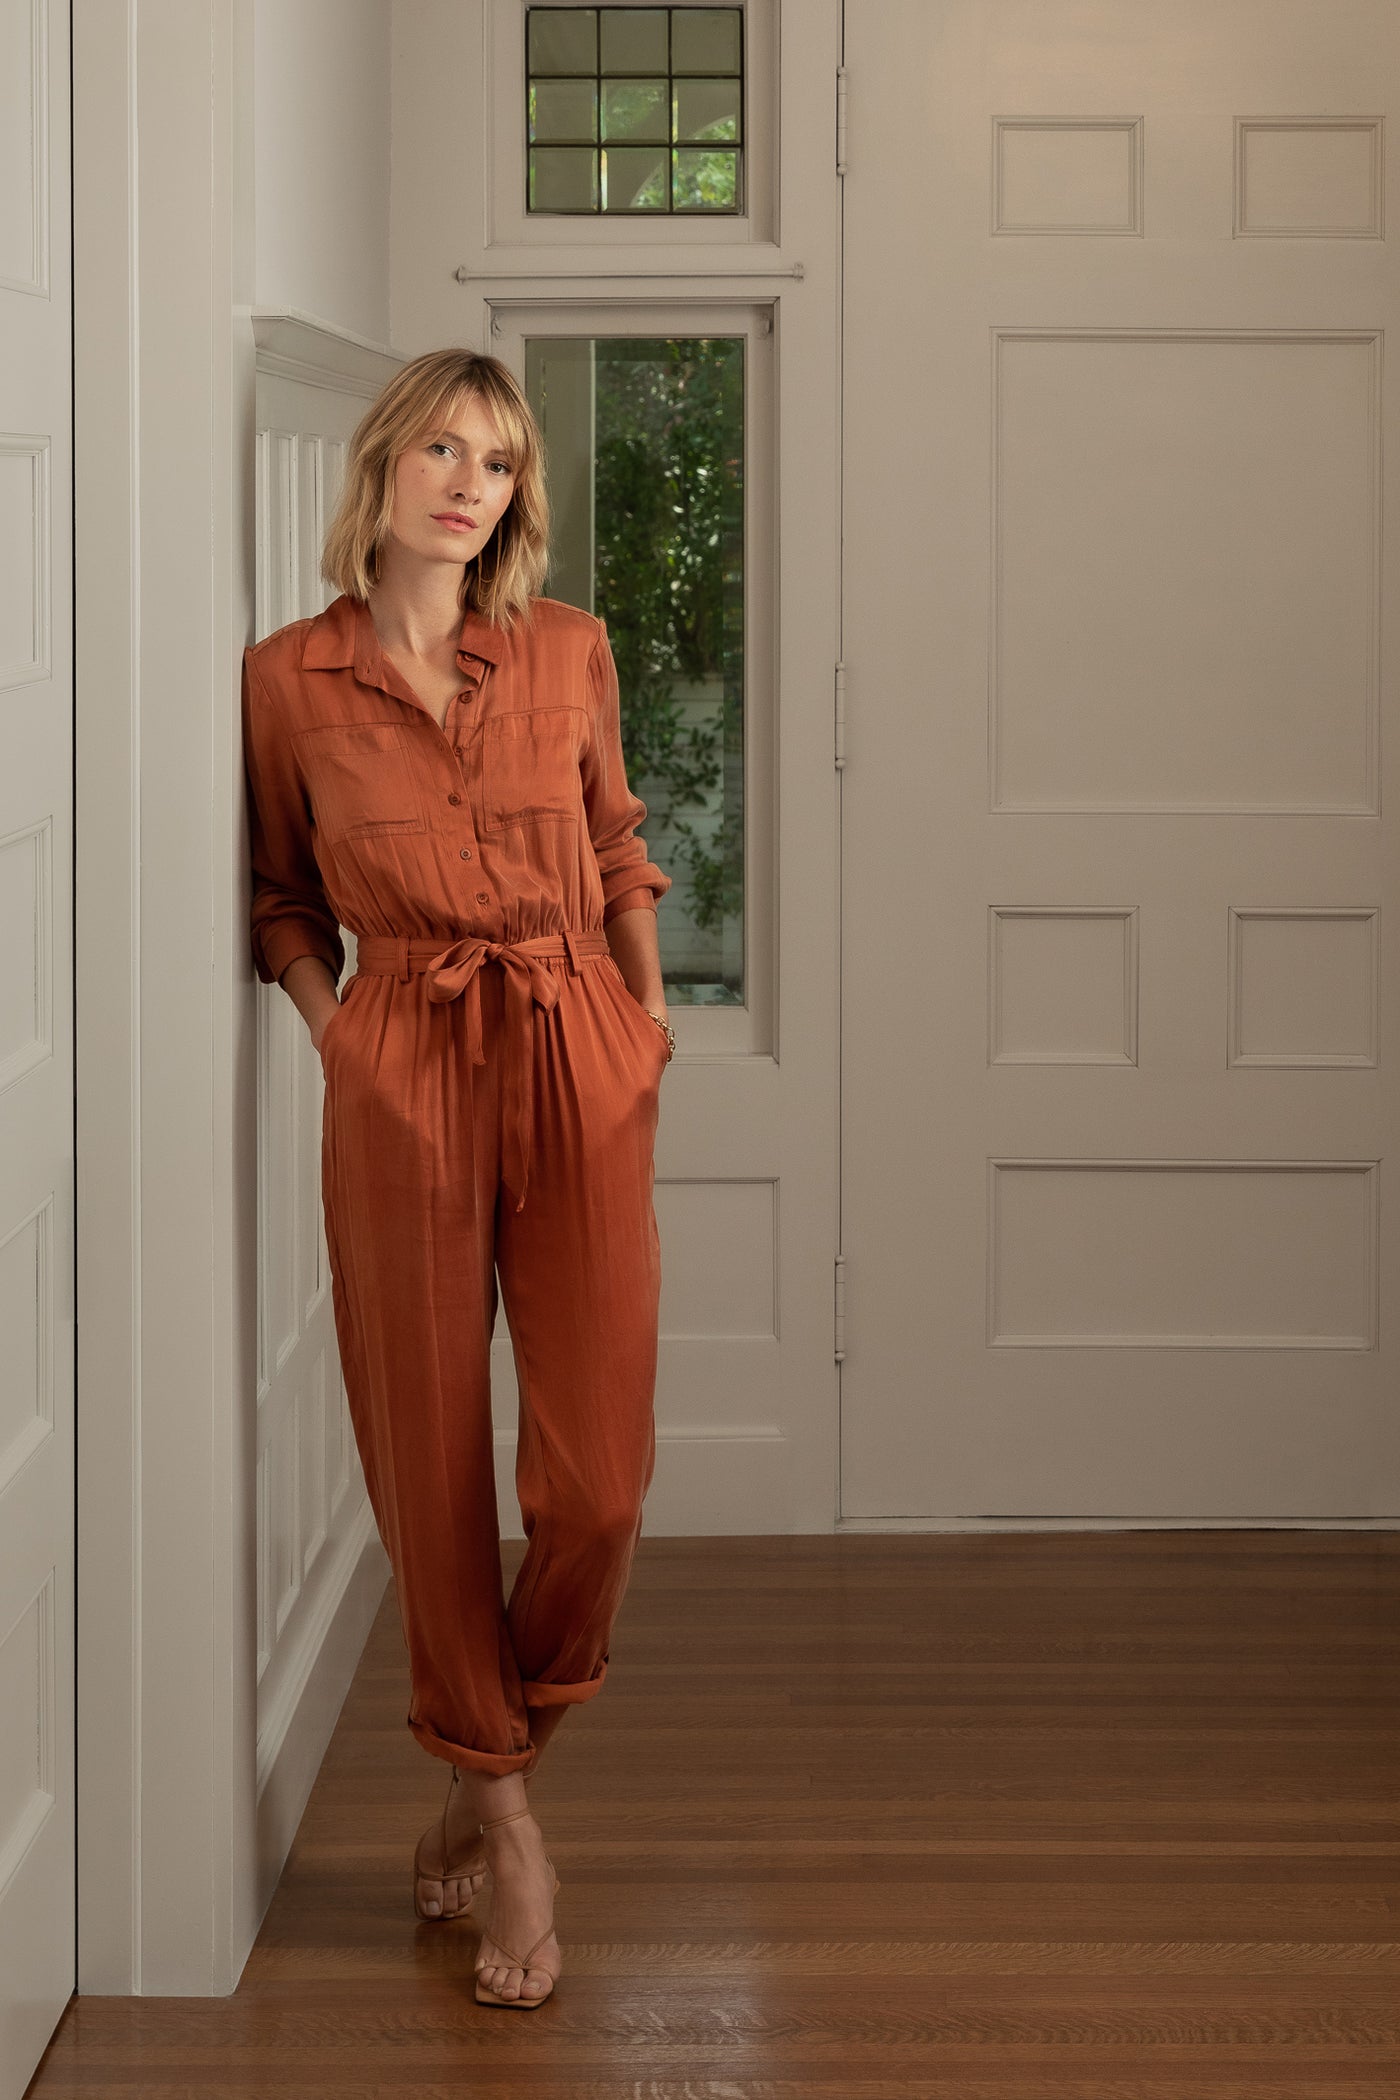 Rory Maple Jumpsuit - Jumpsuits & Rompers - Velvet Heart Clothing